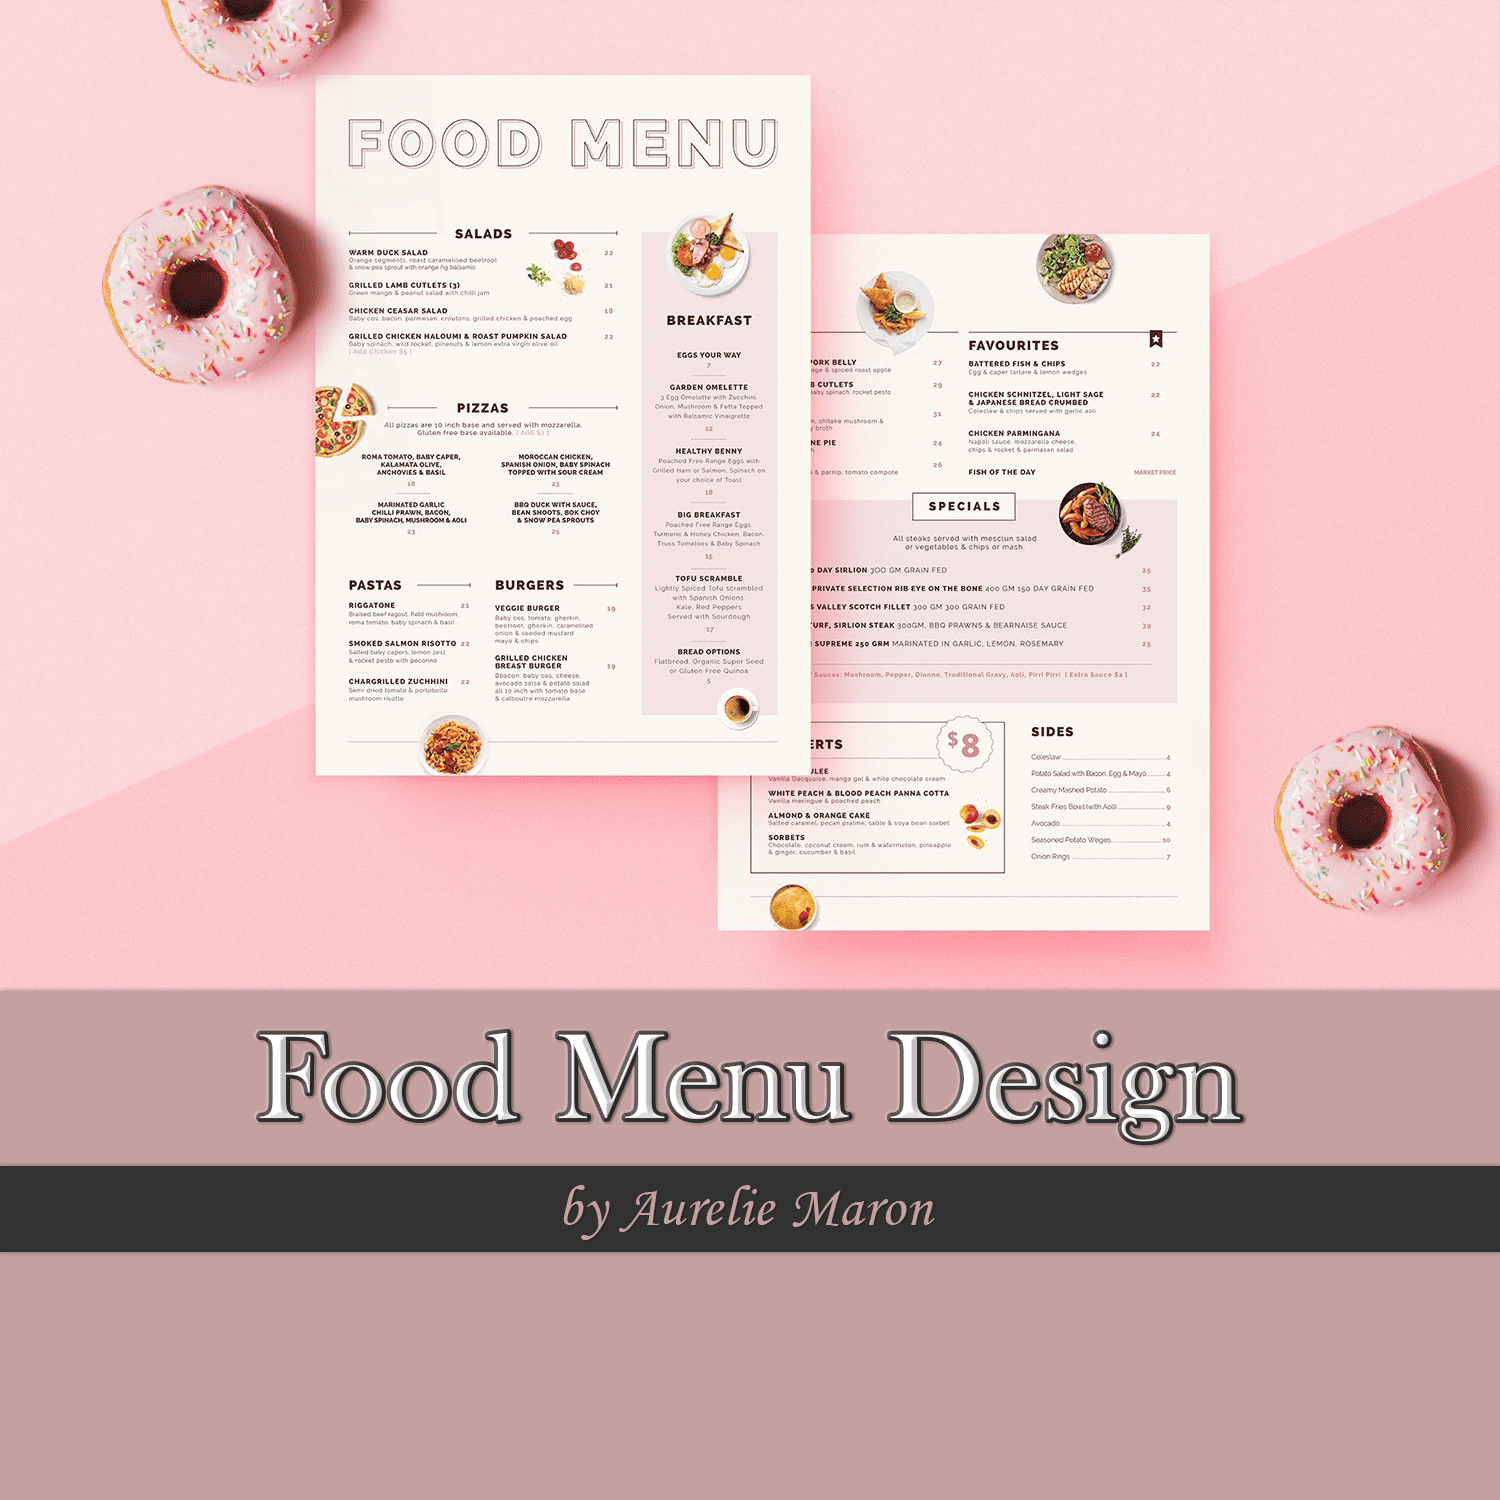 A menu with delicious donuts is depicted on a pink background.